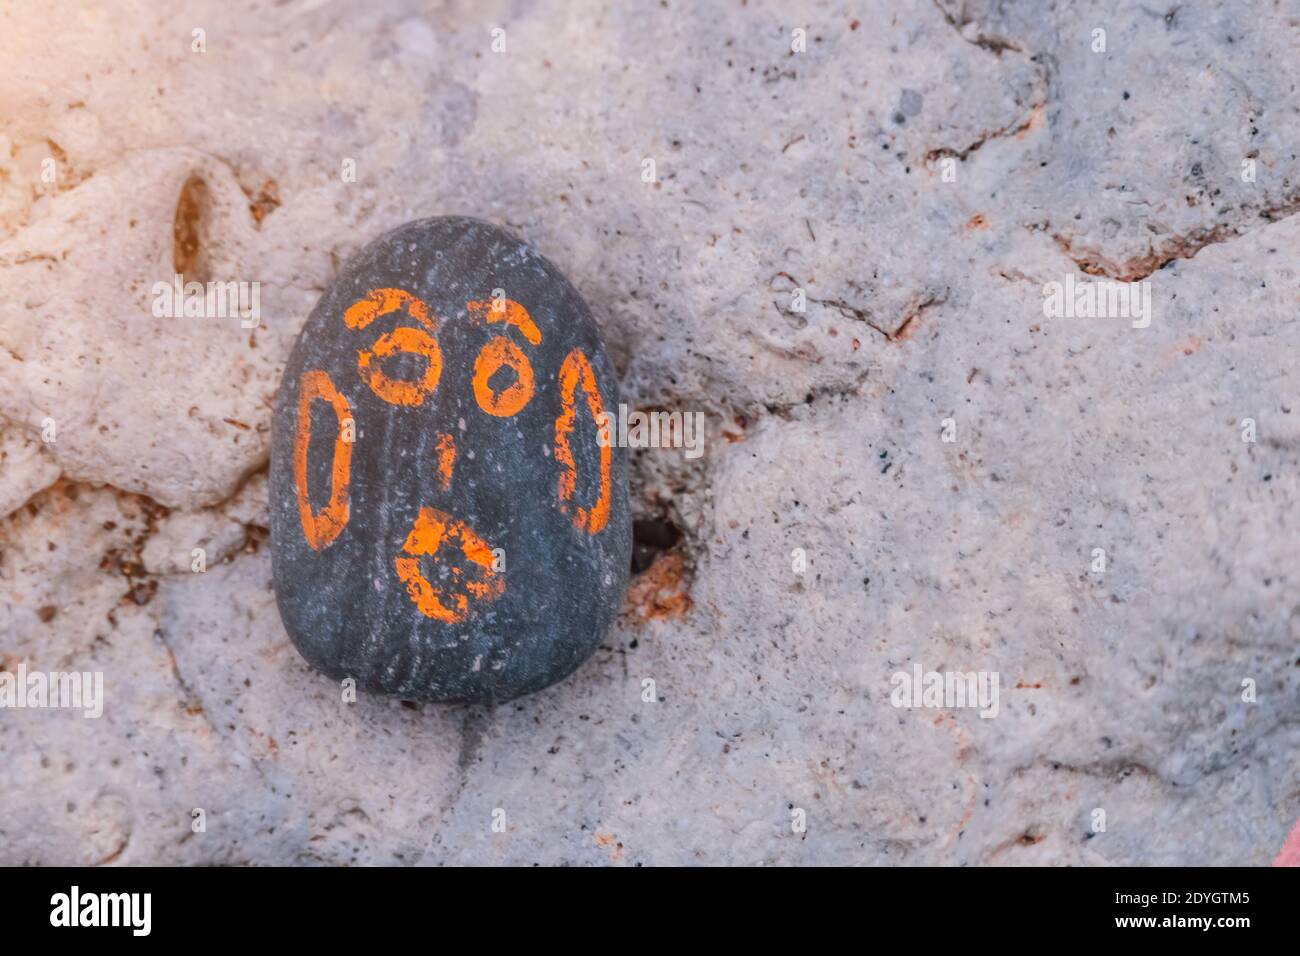 Grey Pebble with a orange painted smiling face. On a small stone is an image of a happy face. Concept: joy, happiness, positive, kindness. Stock Photo